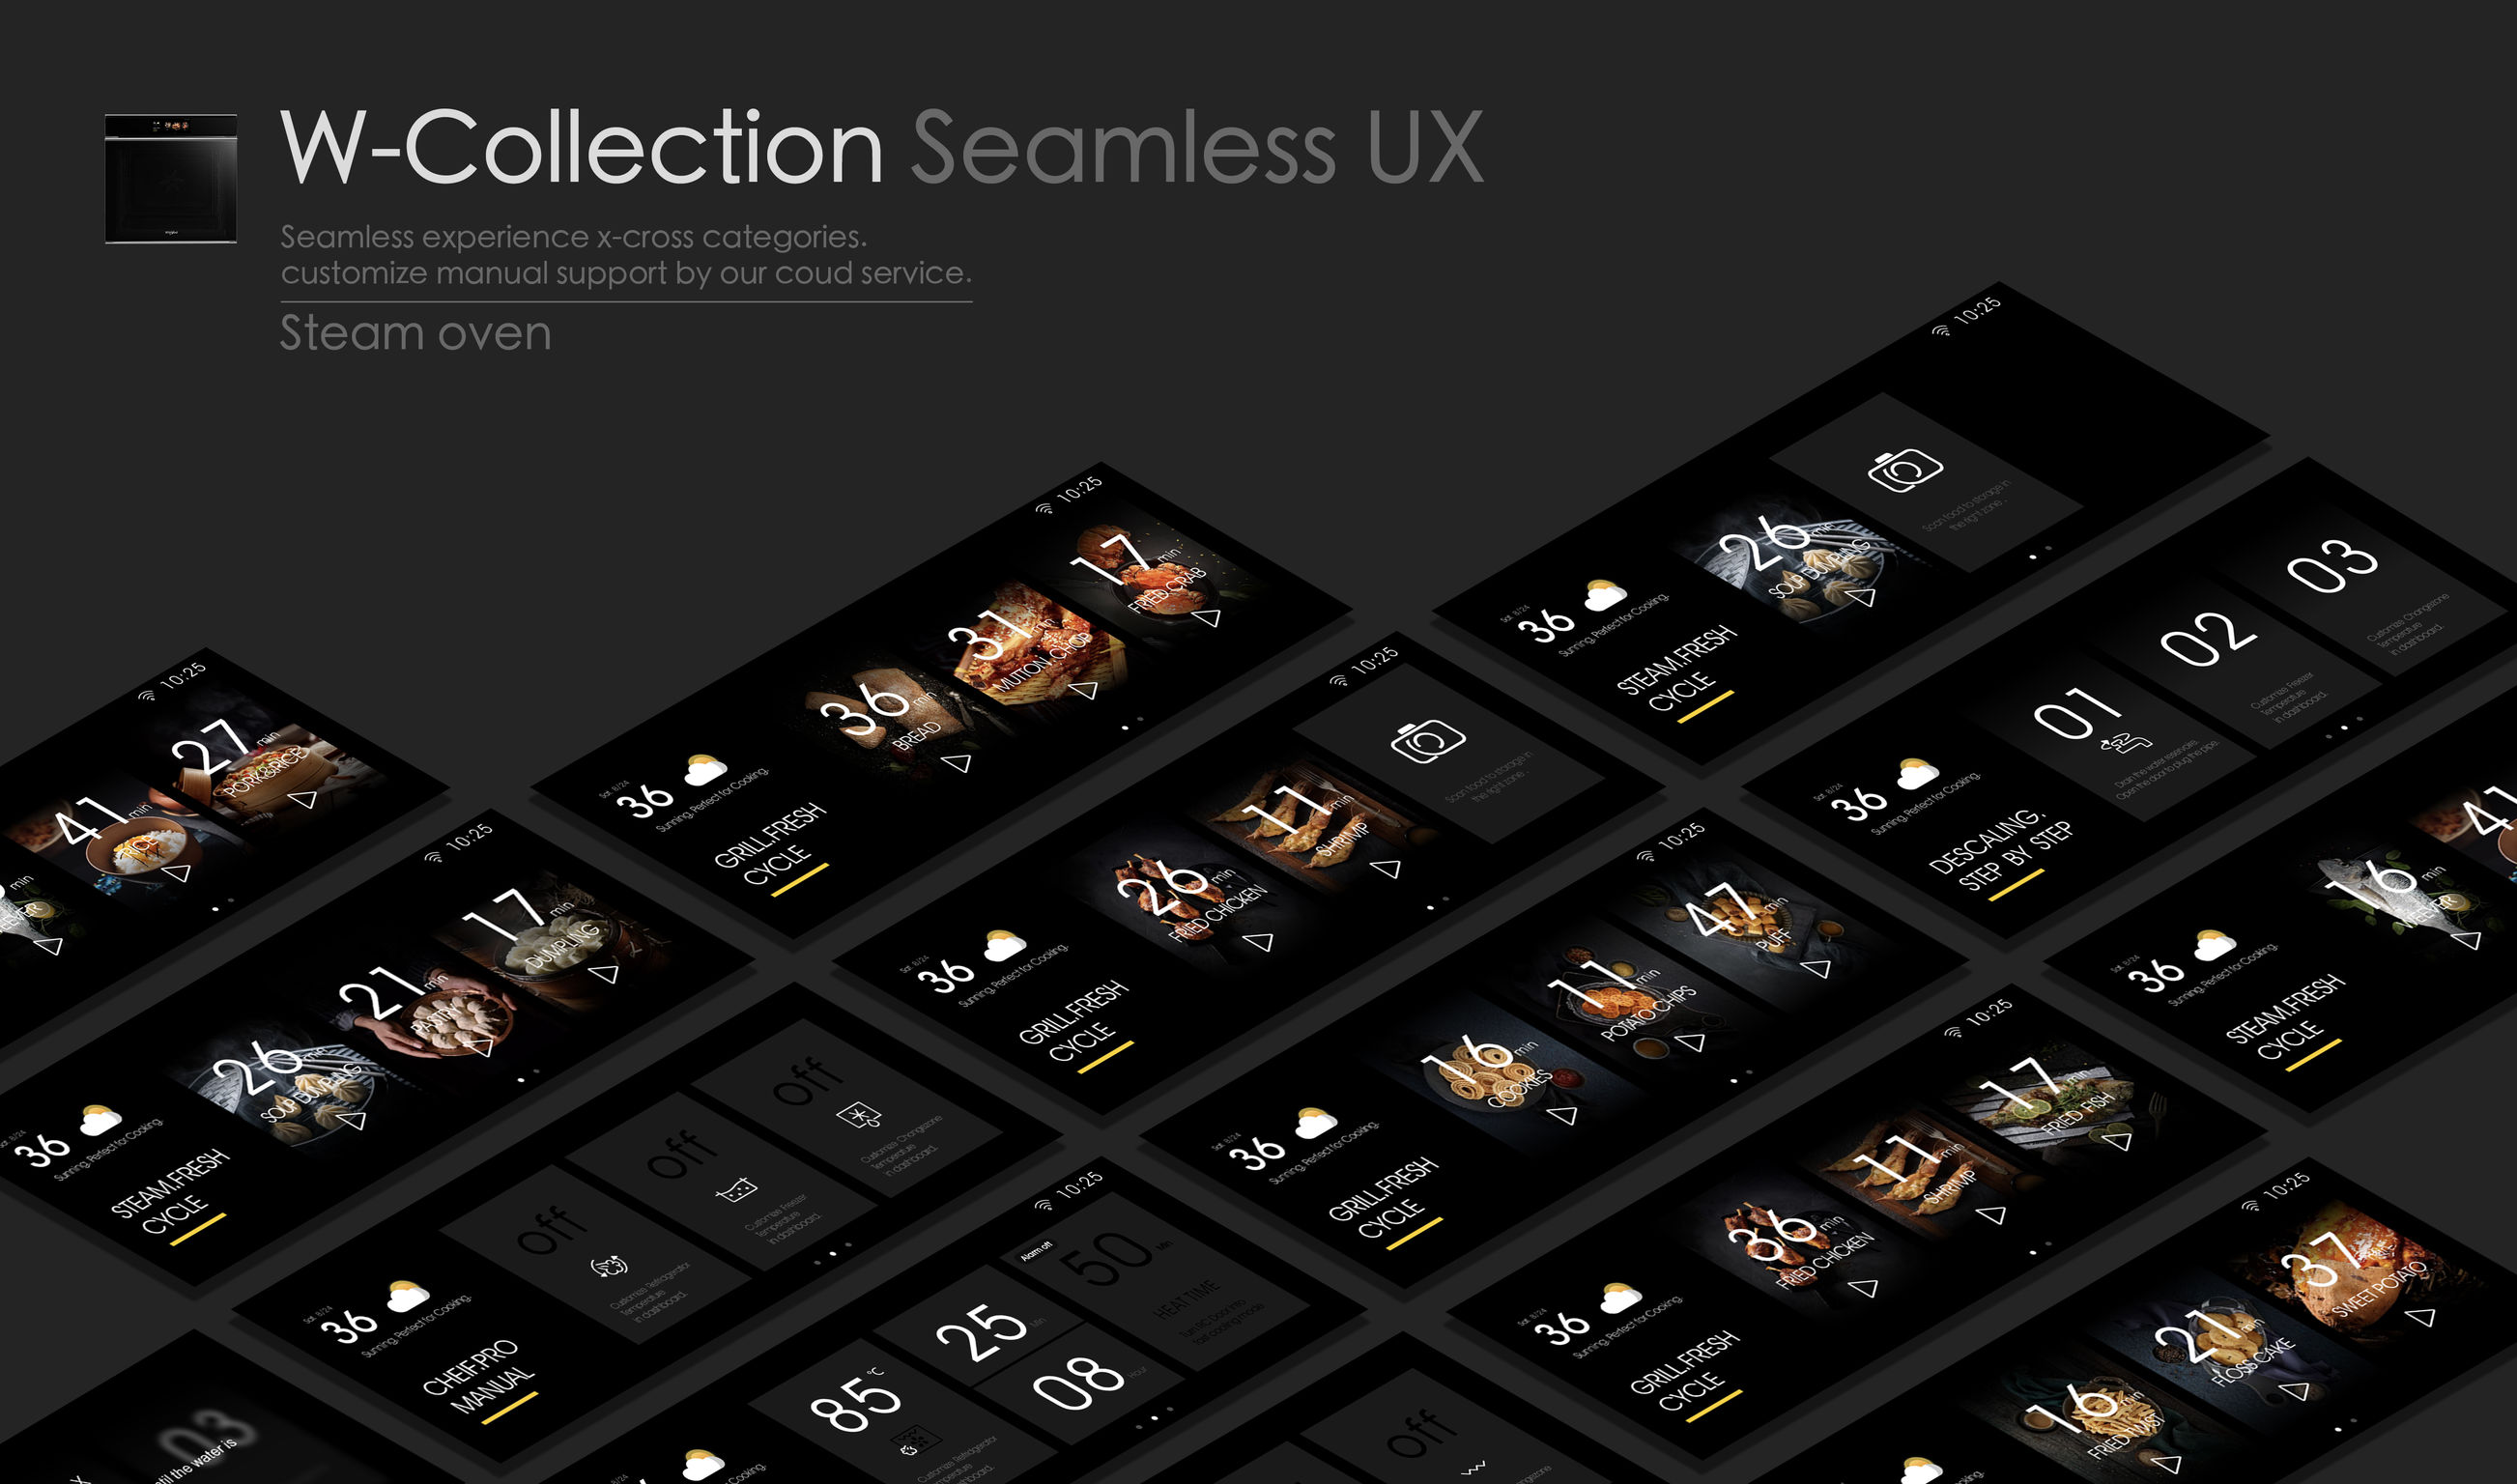 W-Collection Seamless UX